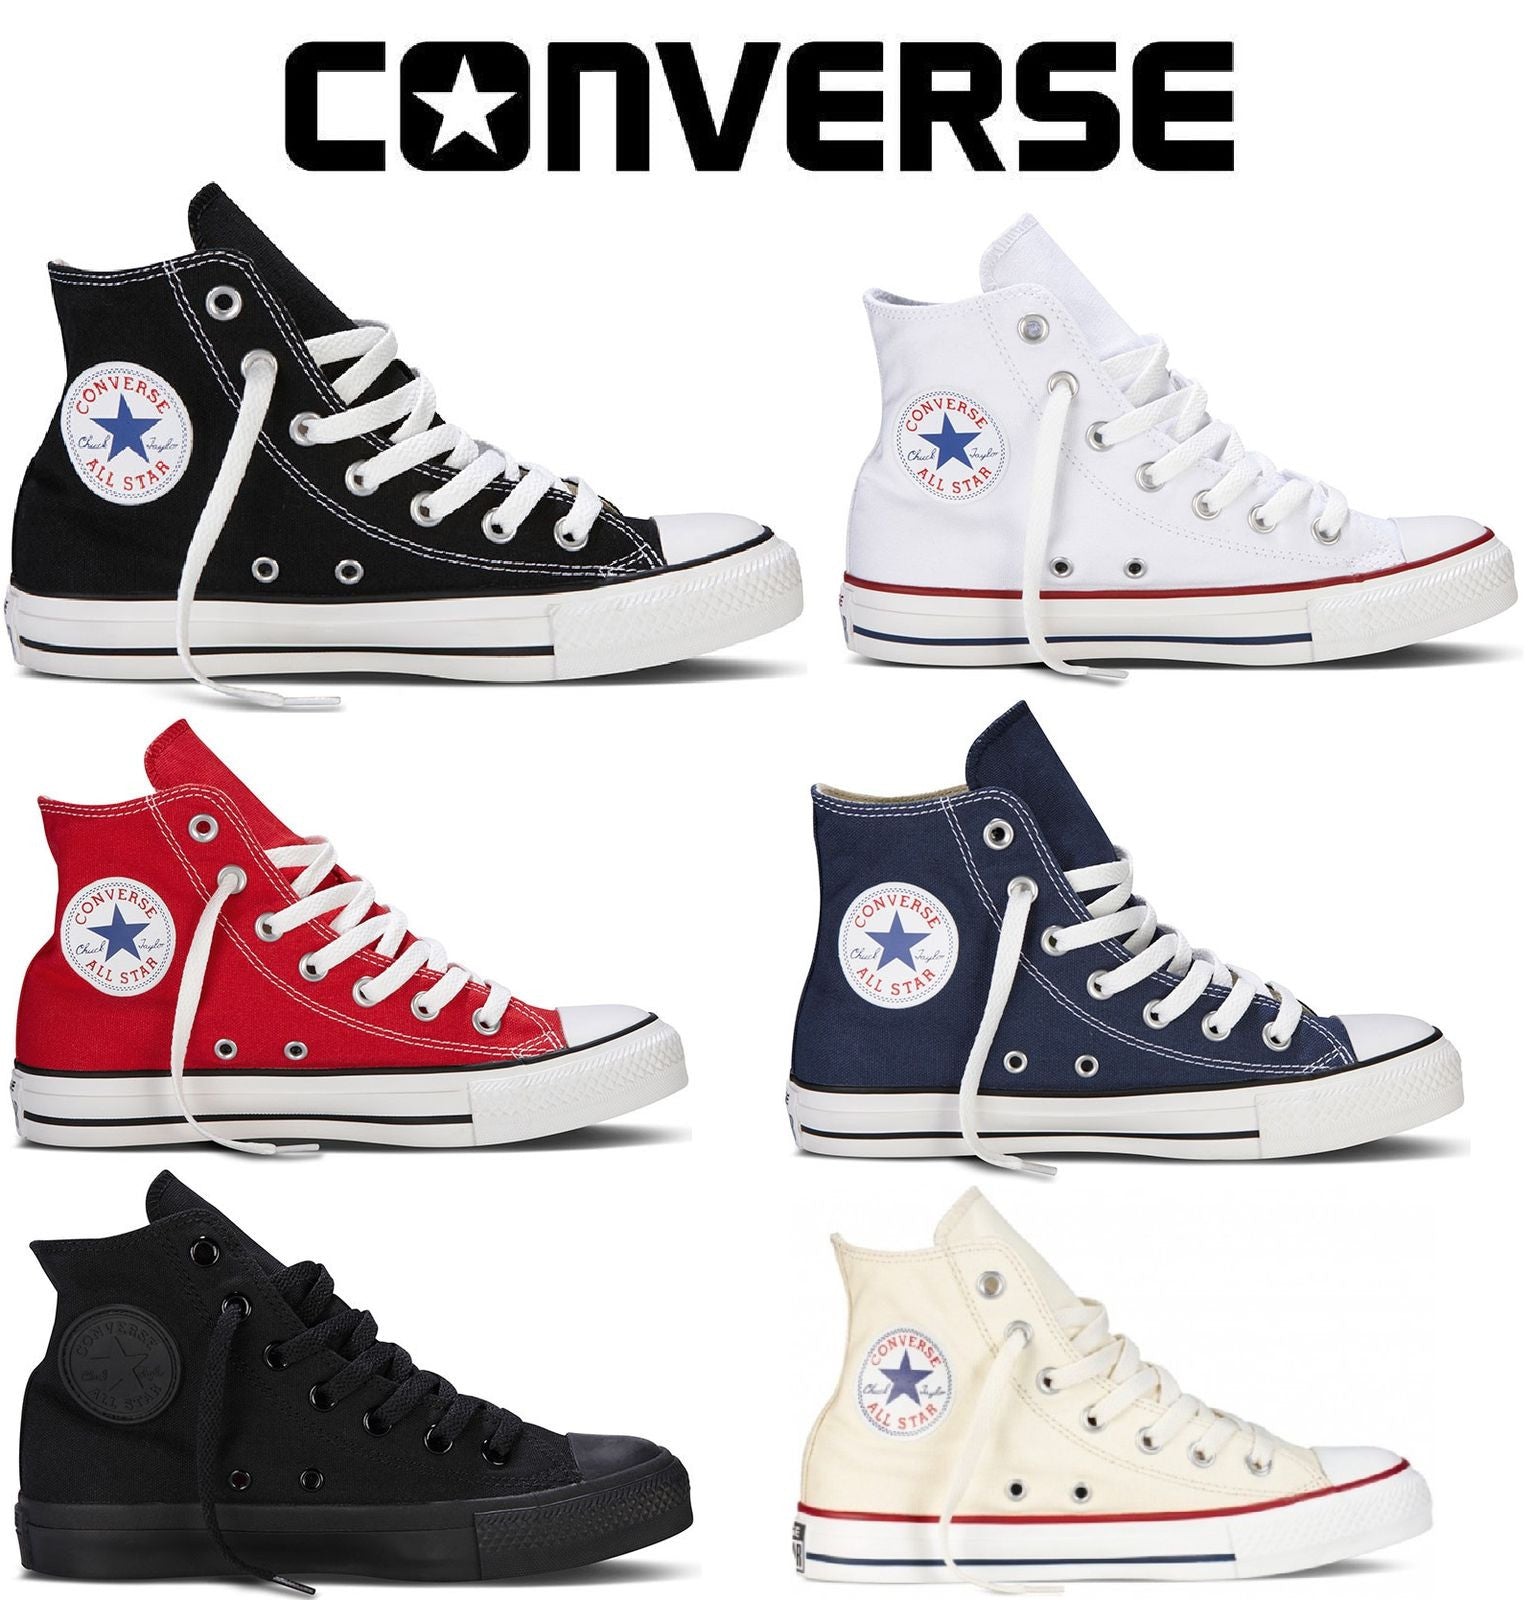 Converse Classic Chuck Taylor Low 